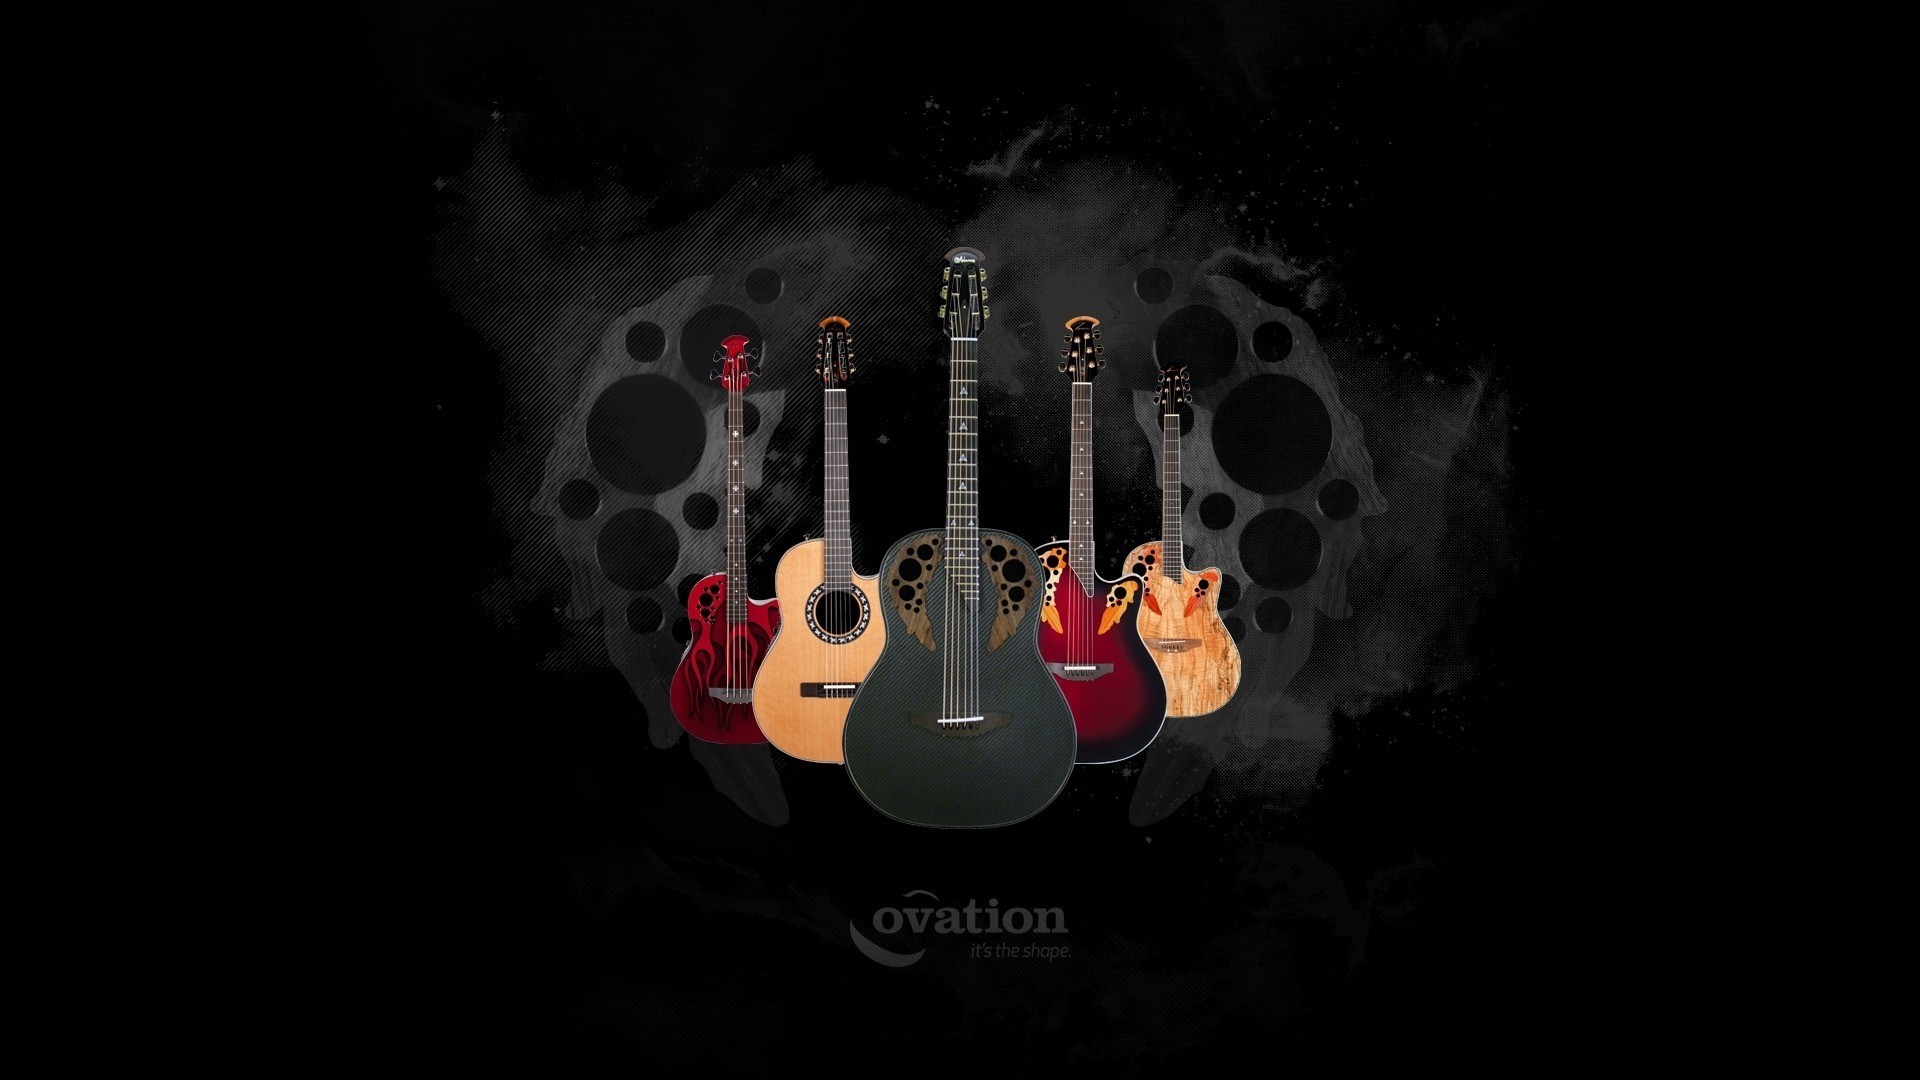 1920x1080 Guitar images Guitar HD wallpaper and background photos